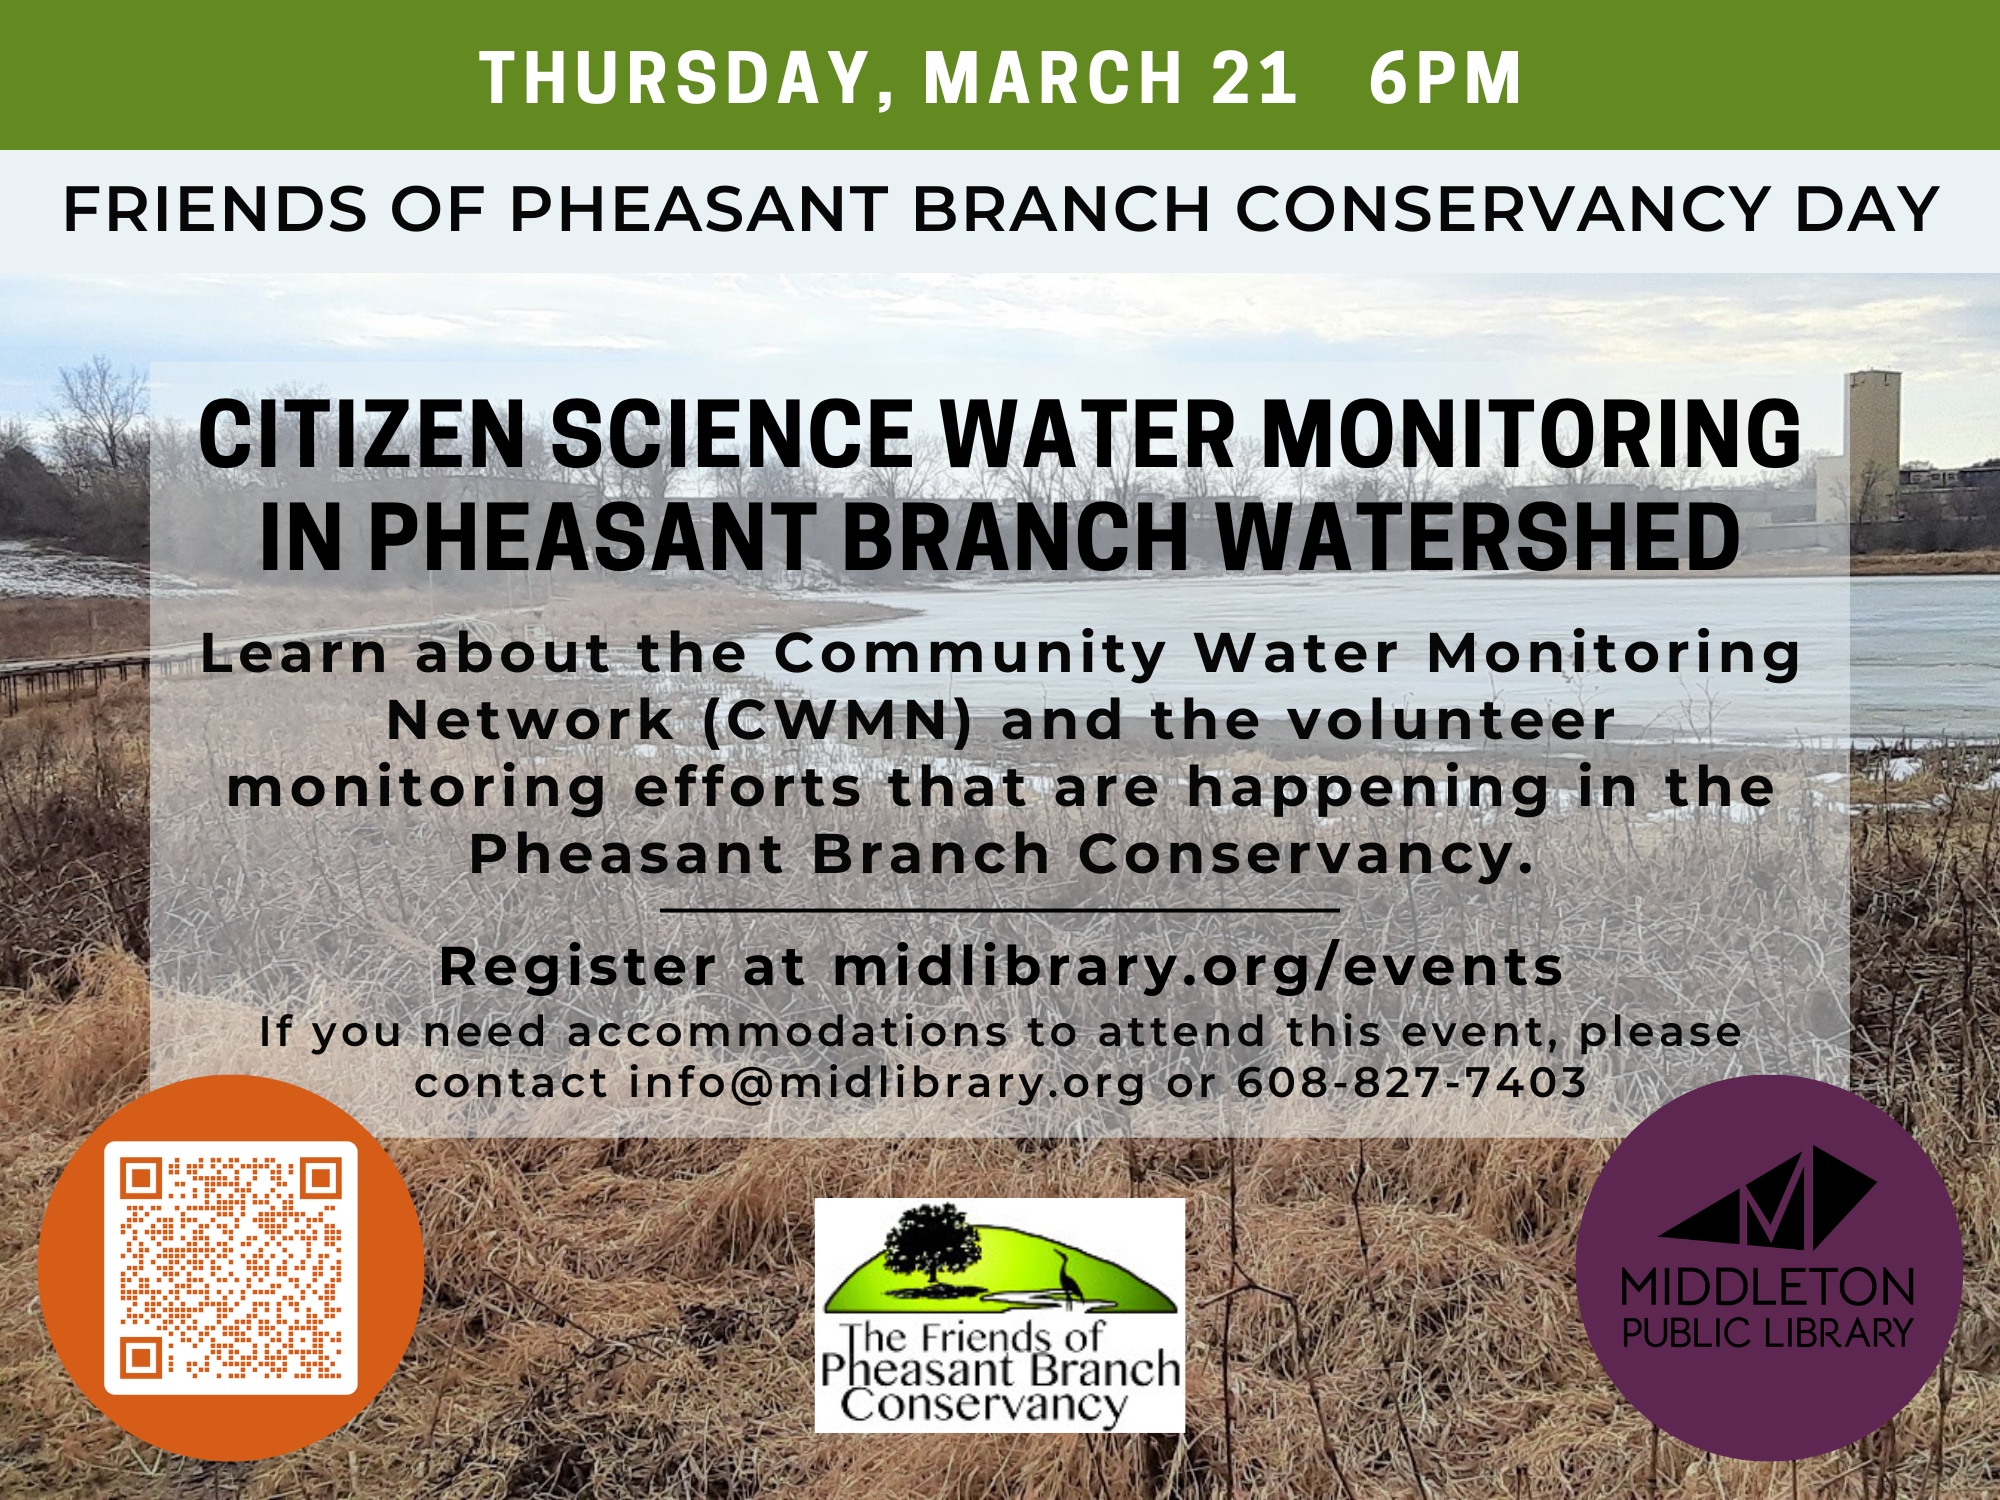 Citizen Science Water Monitoring in Pheasant Branch Watershed